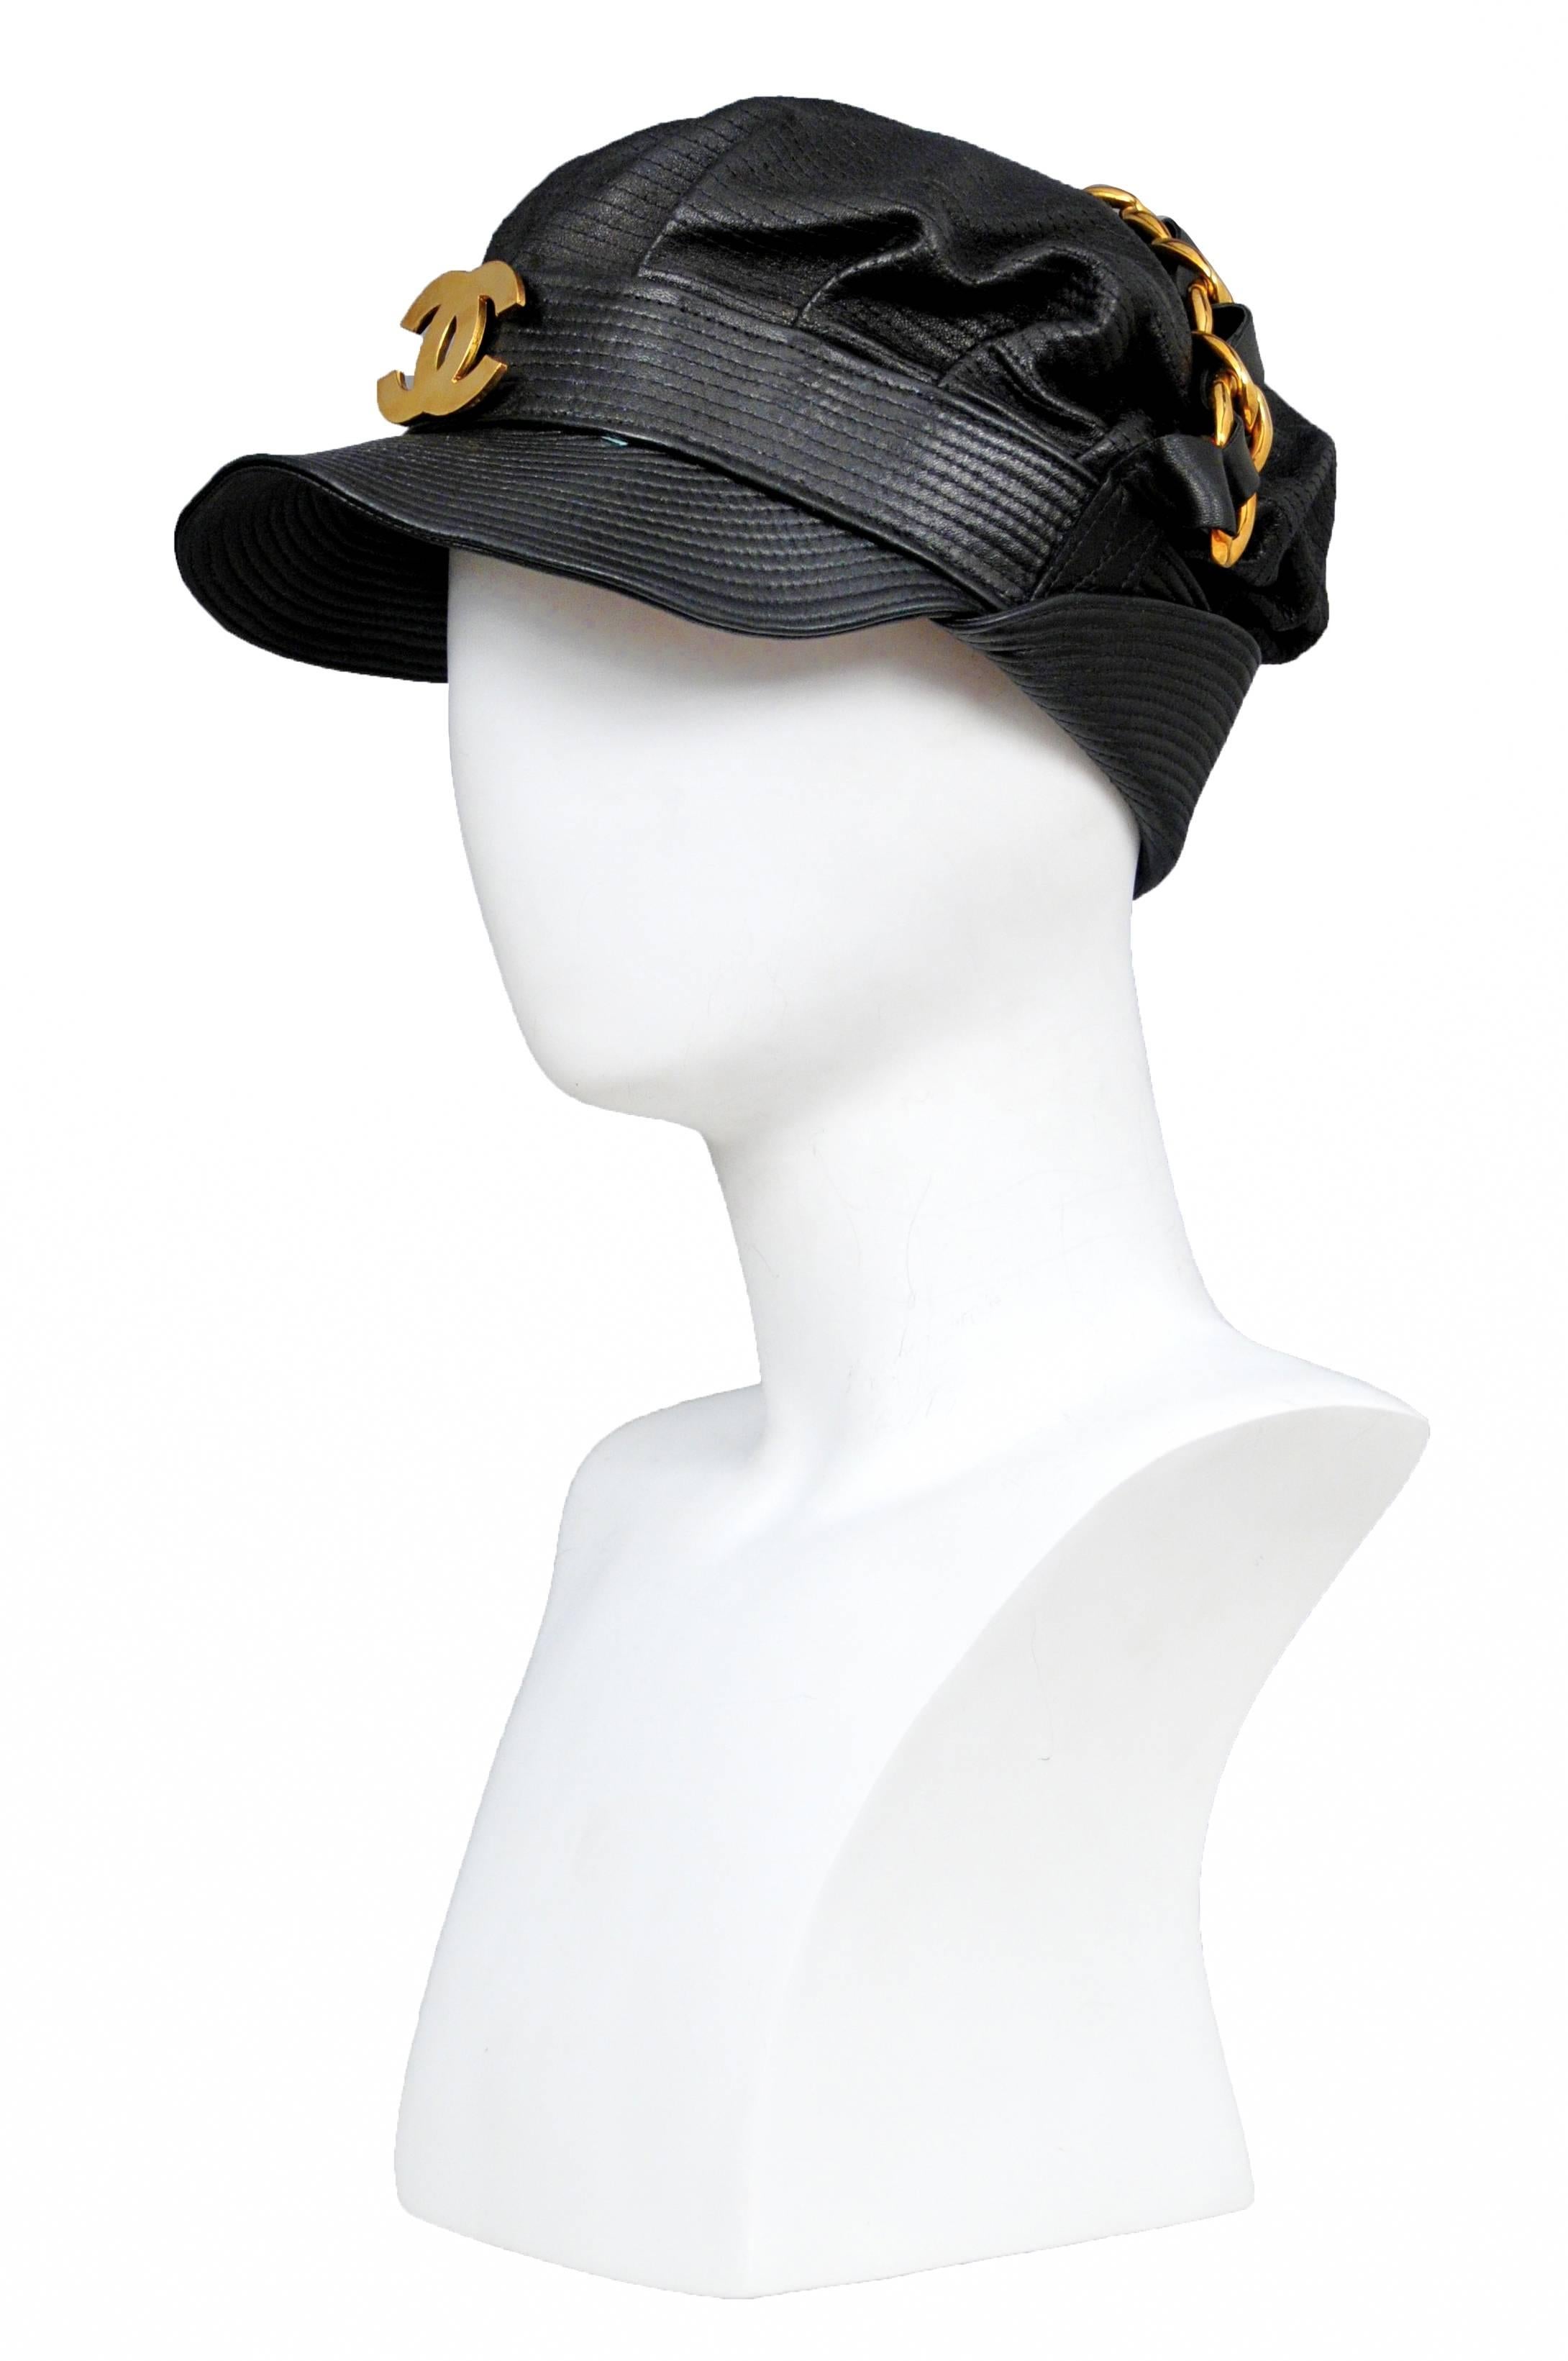 Vintage Chanel black leather biker hat with gold and leather braided chain across the top and a gold tone interlocking CC emblem at the center front. Please contact for additional photos. 